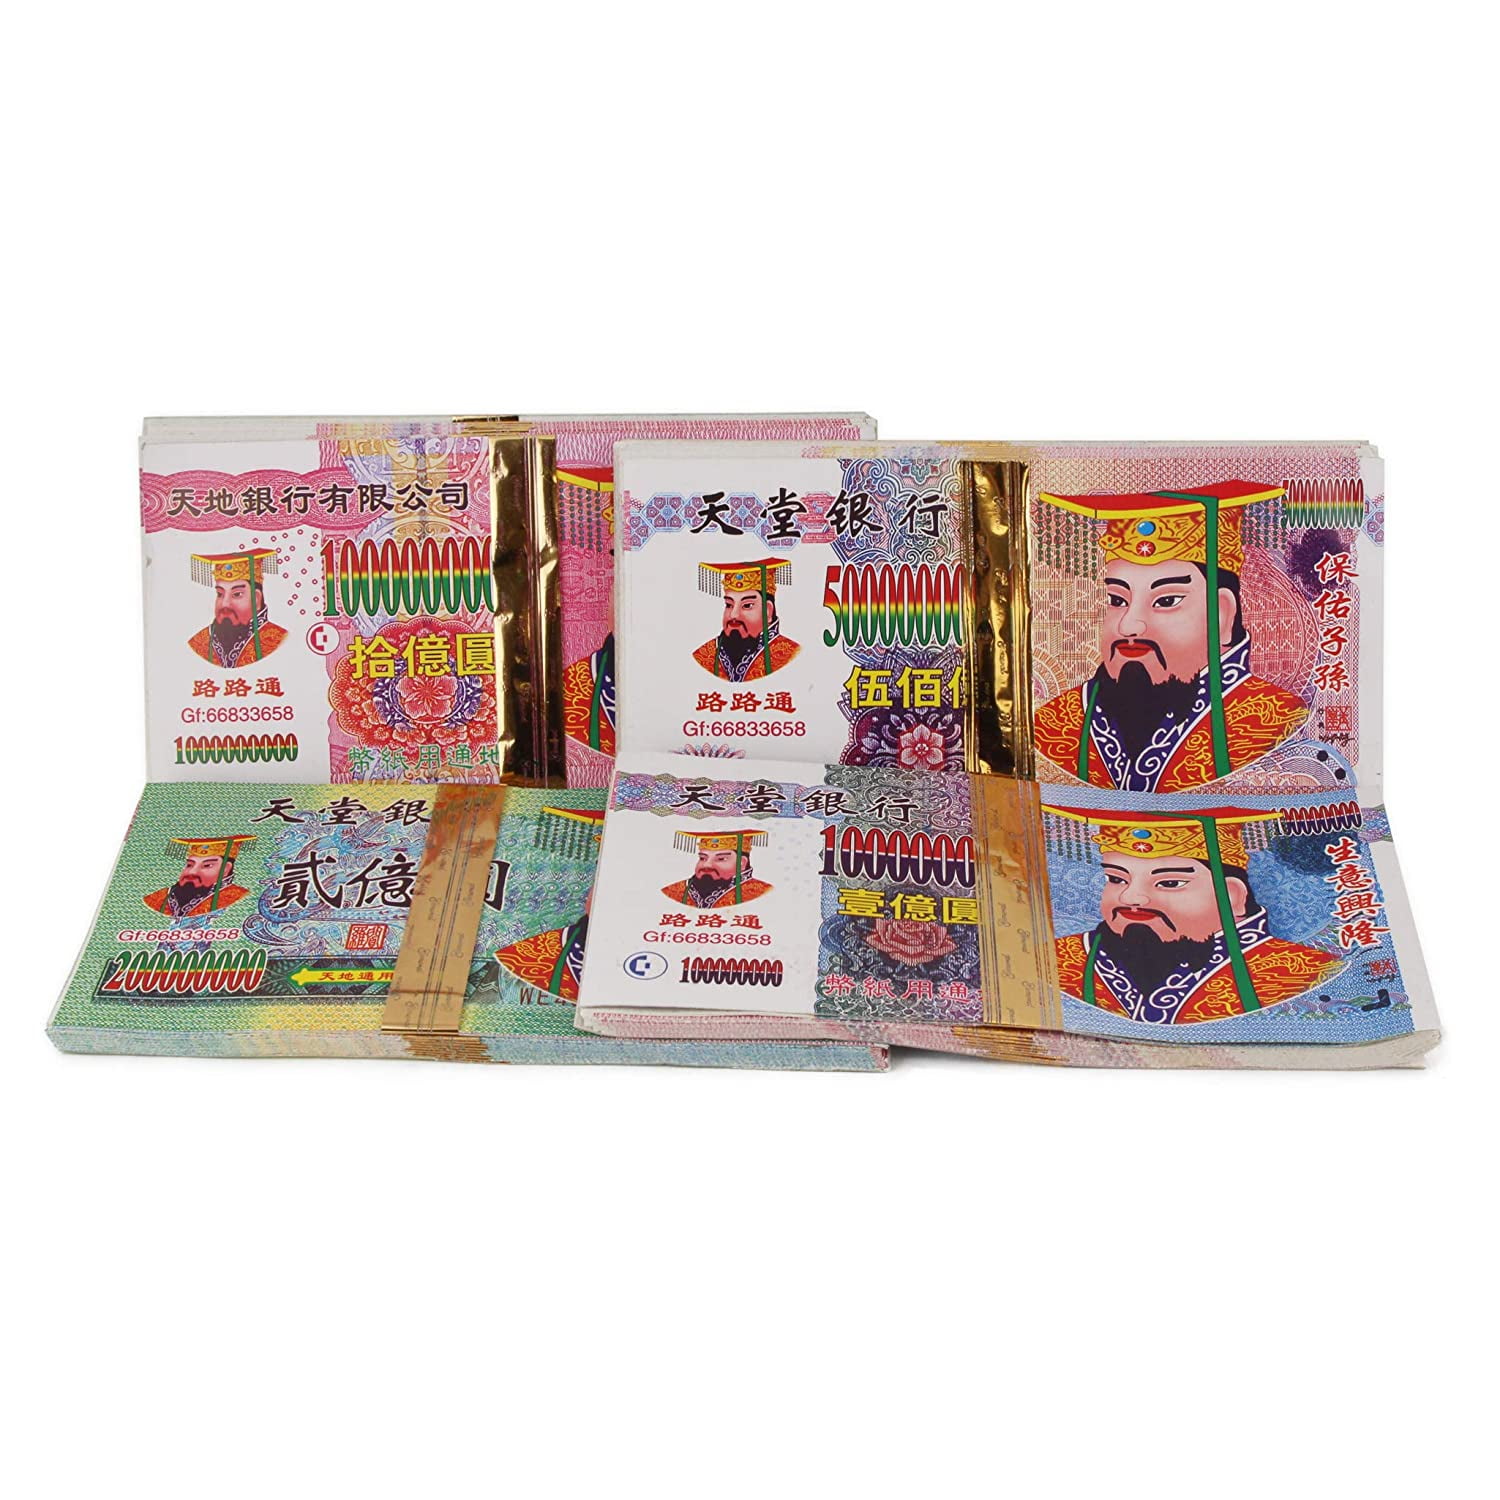 SET 1 Set of 8 Chinese Joss Paper Heaven Hell Bank Note with Credit Card Ten Million 200 PCS